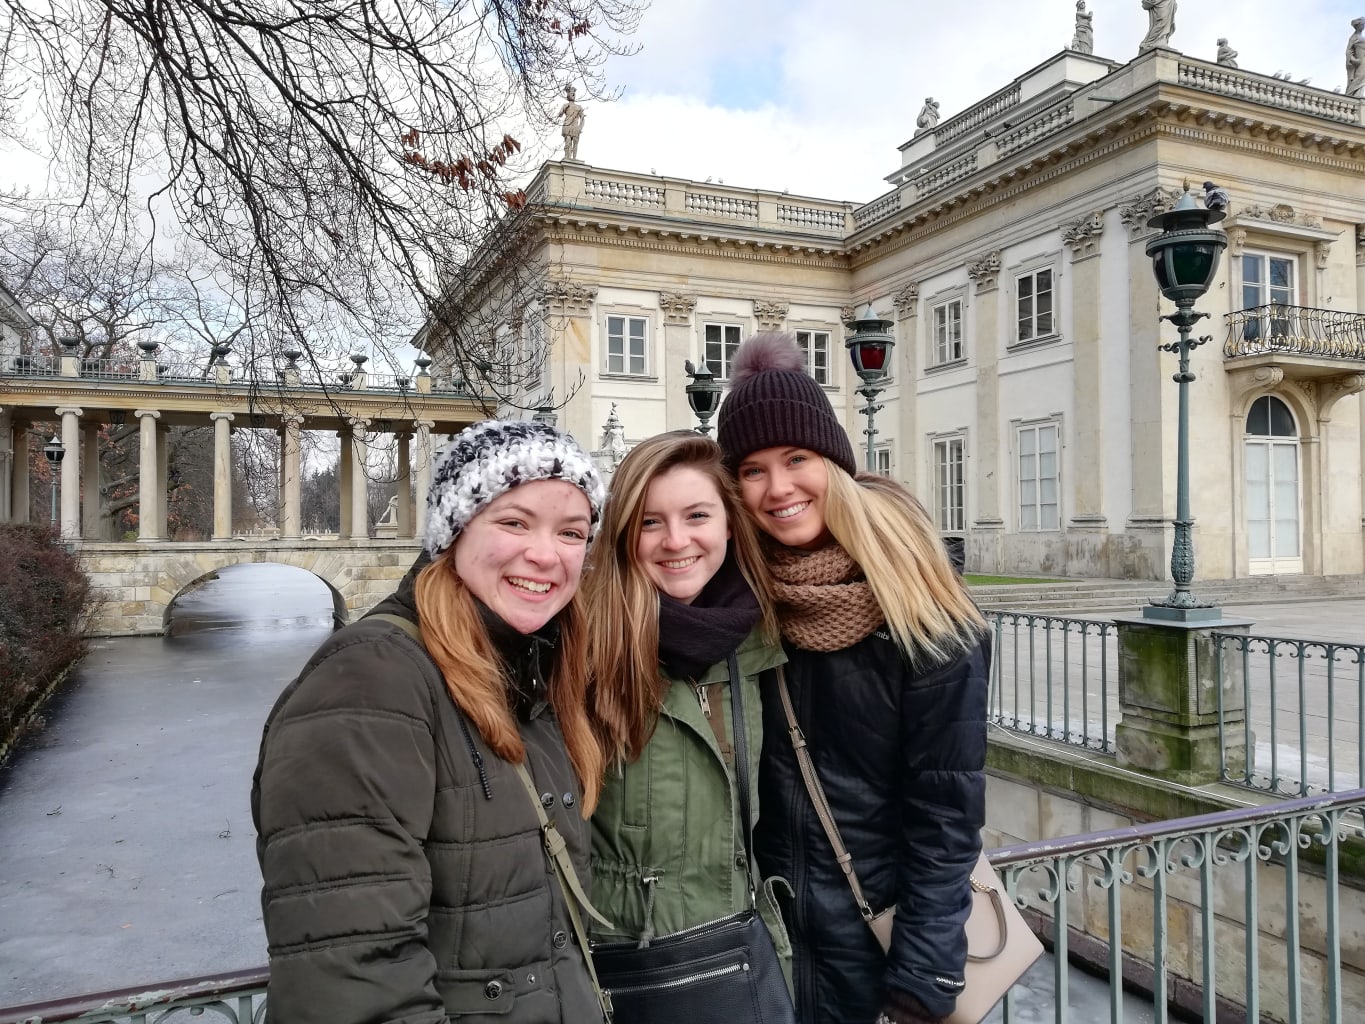 Three girls smiling in front of building.